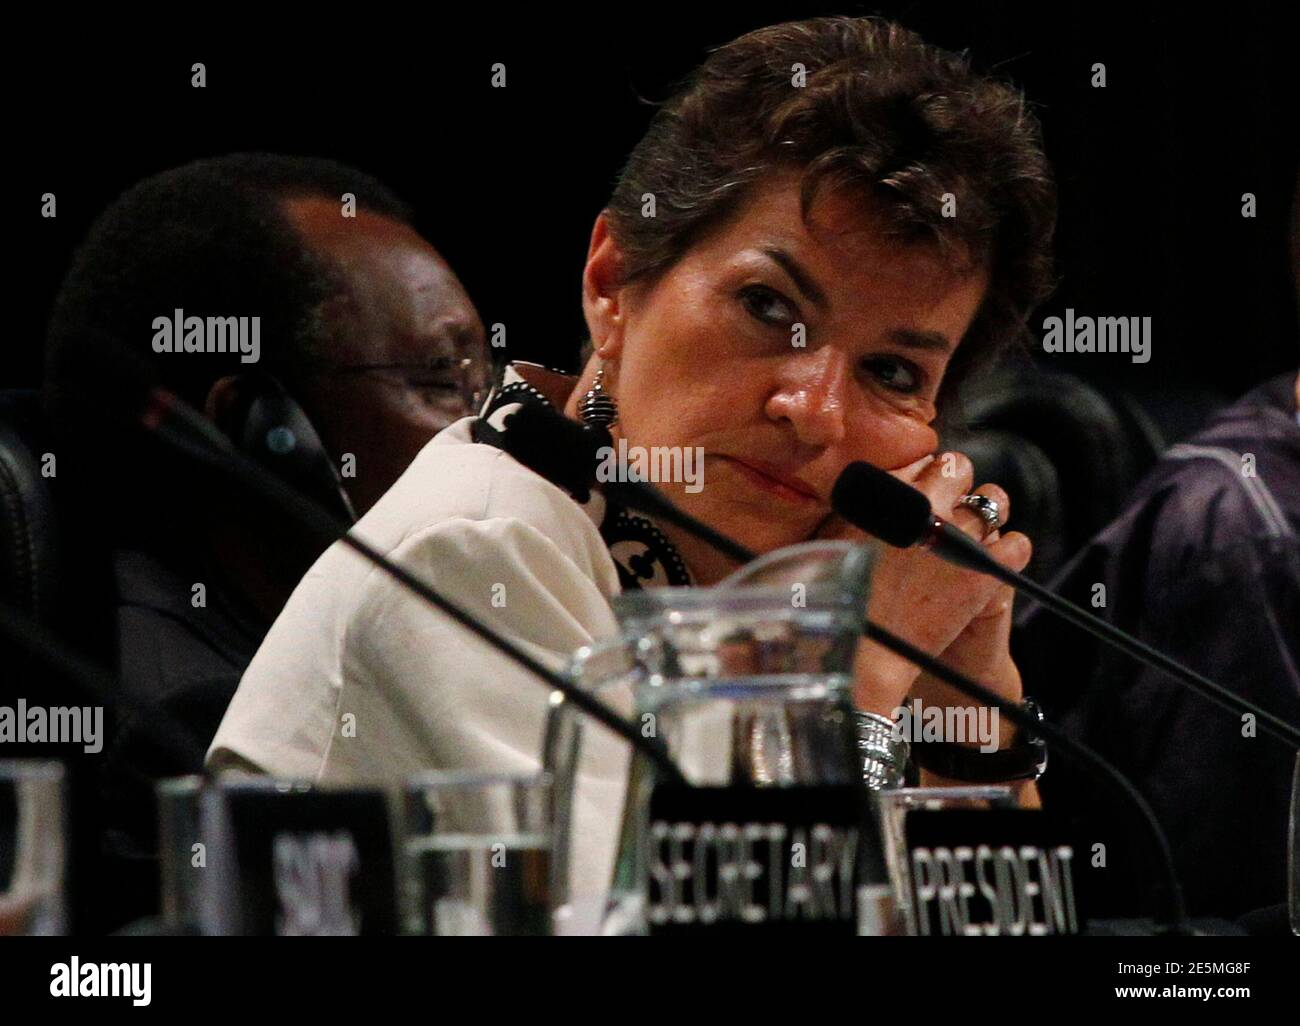 United Nations Framework Convention on Climate Change (UNFCCC) Executive Secretary Christiana Figueres listens to speakers at the opening plenary session of the Conference of the Parties (COP17) in Durban, November 28, 2011. Almost 200 nations began global climate talks on Monday with time running out to save the Kyoto Protocol aimed at cutting the greenhouse gas emissions scientists blame for rising sea levels, intense storms, drought and crop failures. The COP17 runs until December 9.  REUTERS/Mike Hutchings (SOUTH AFRICA - Tags: ENVIRONMENT POLITICS) Stock Photo